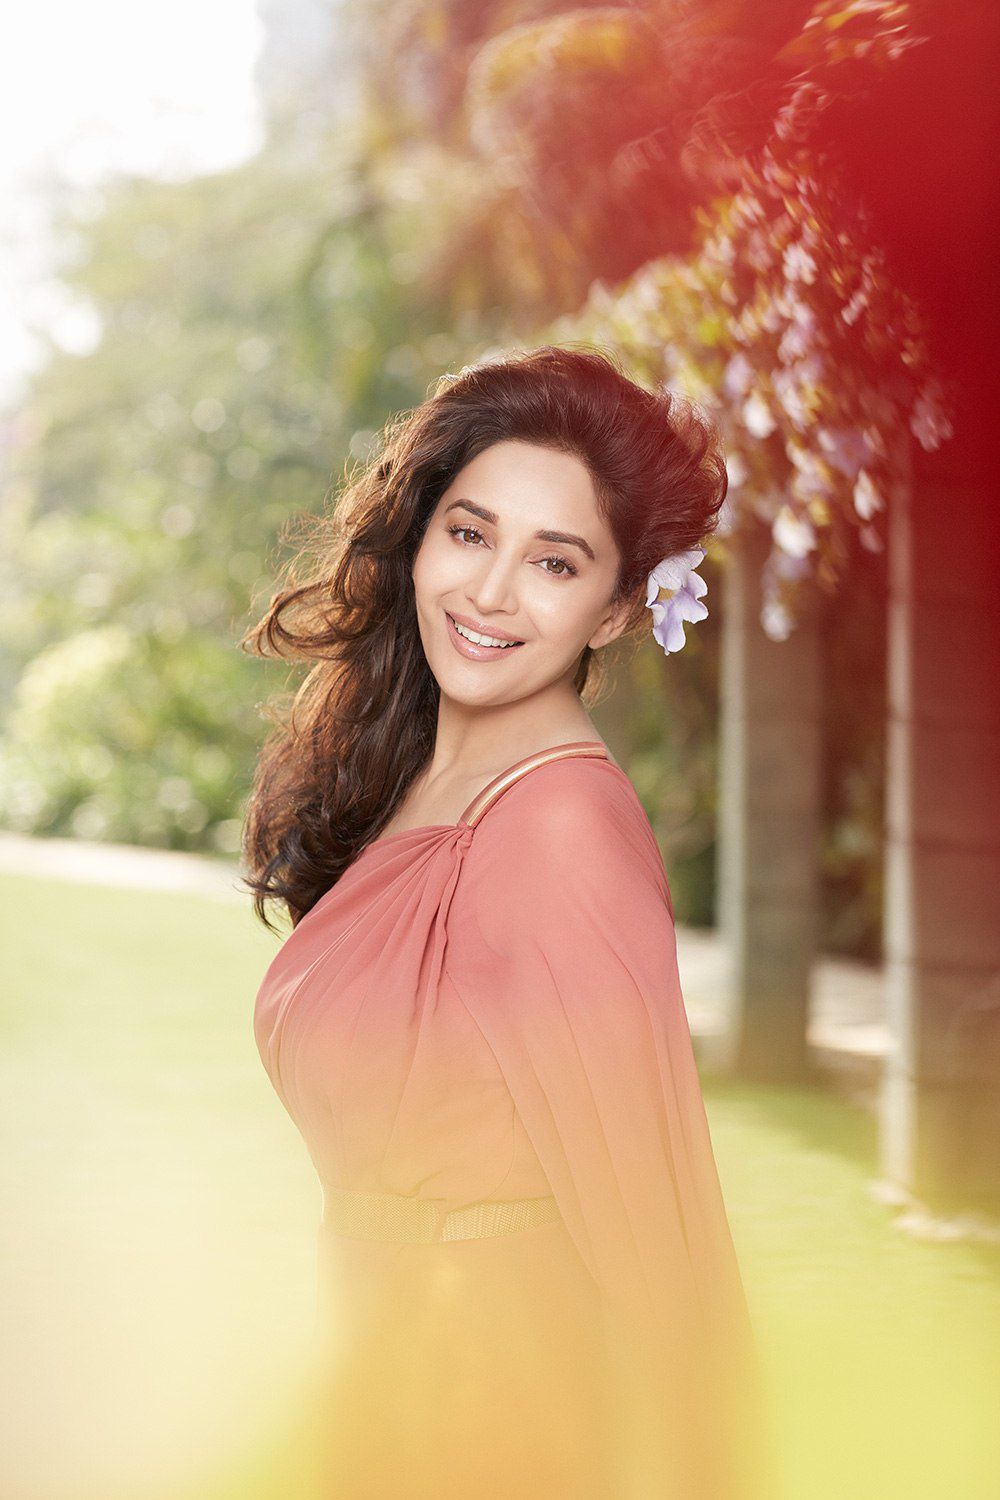 Madhuri Dixit Wallpaper - Top 10 Dancers In The World 2018 , HD Wallpaper & Backgrounds